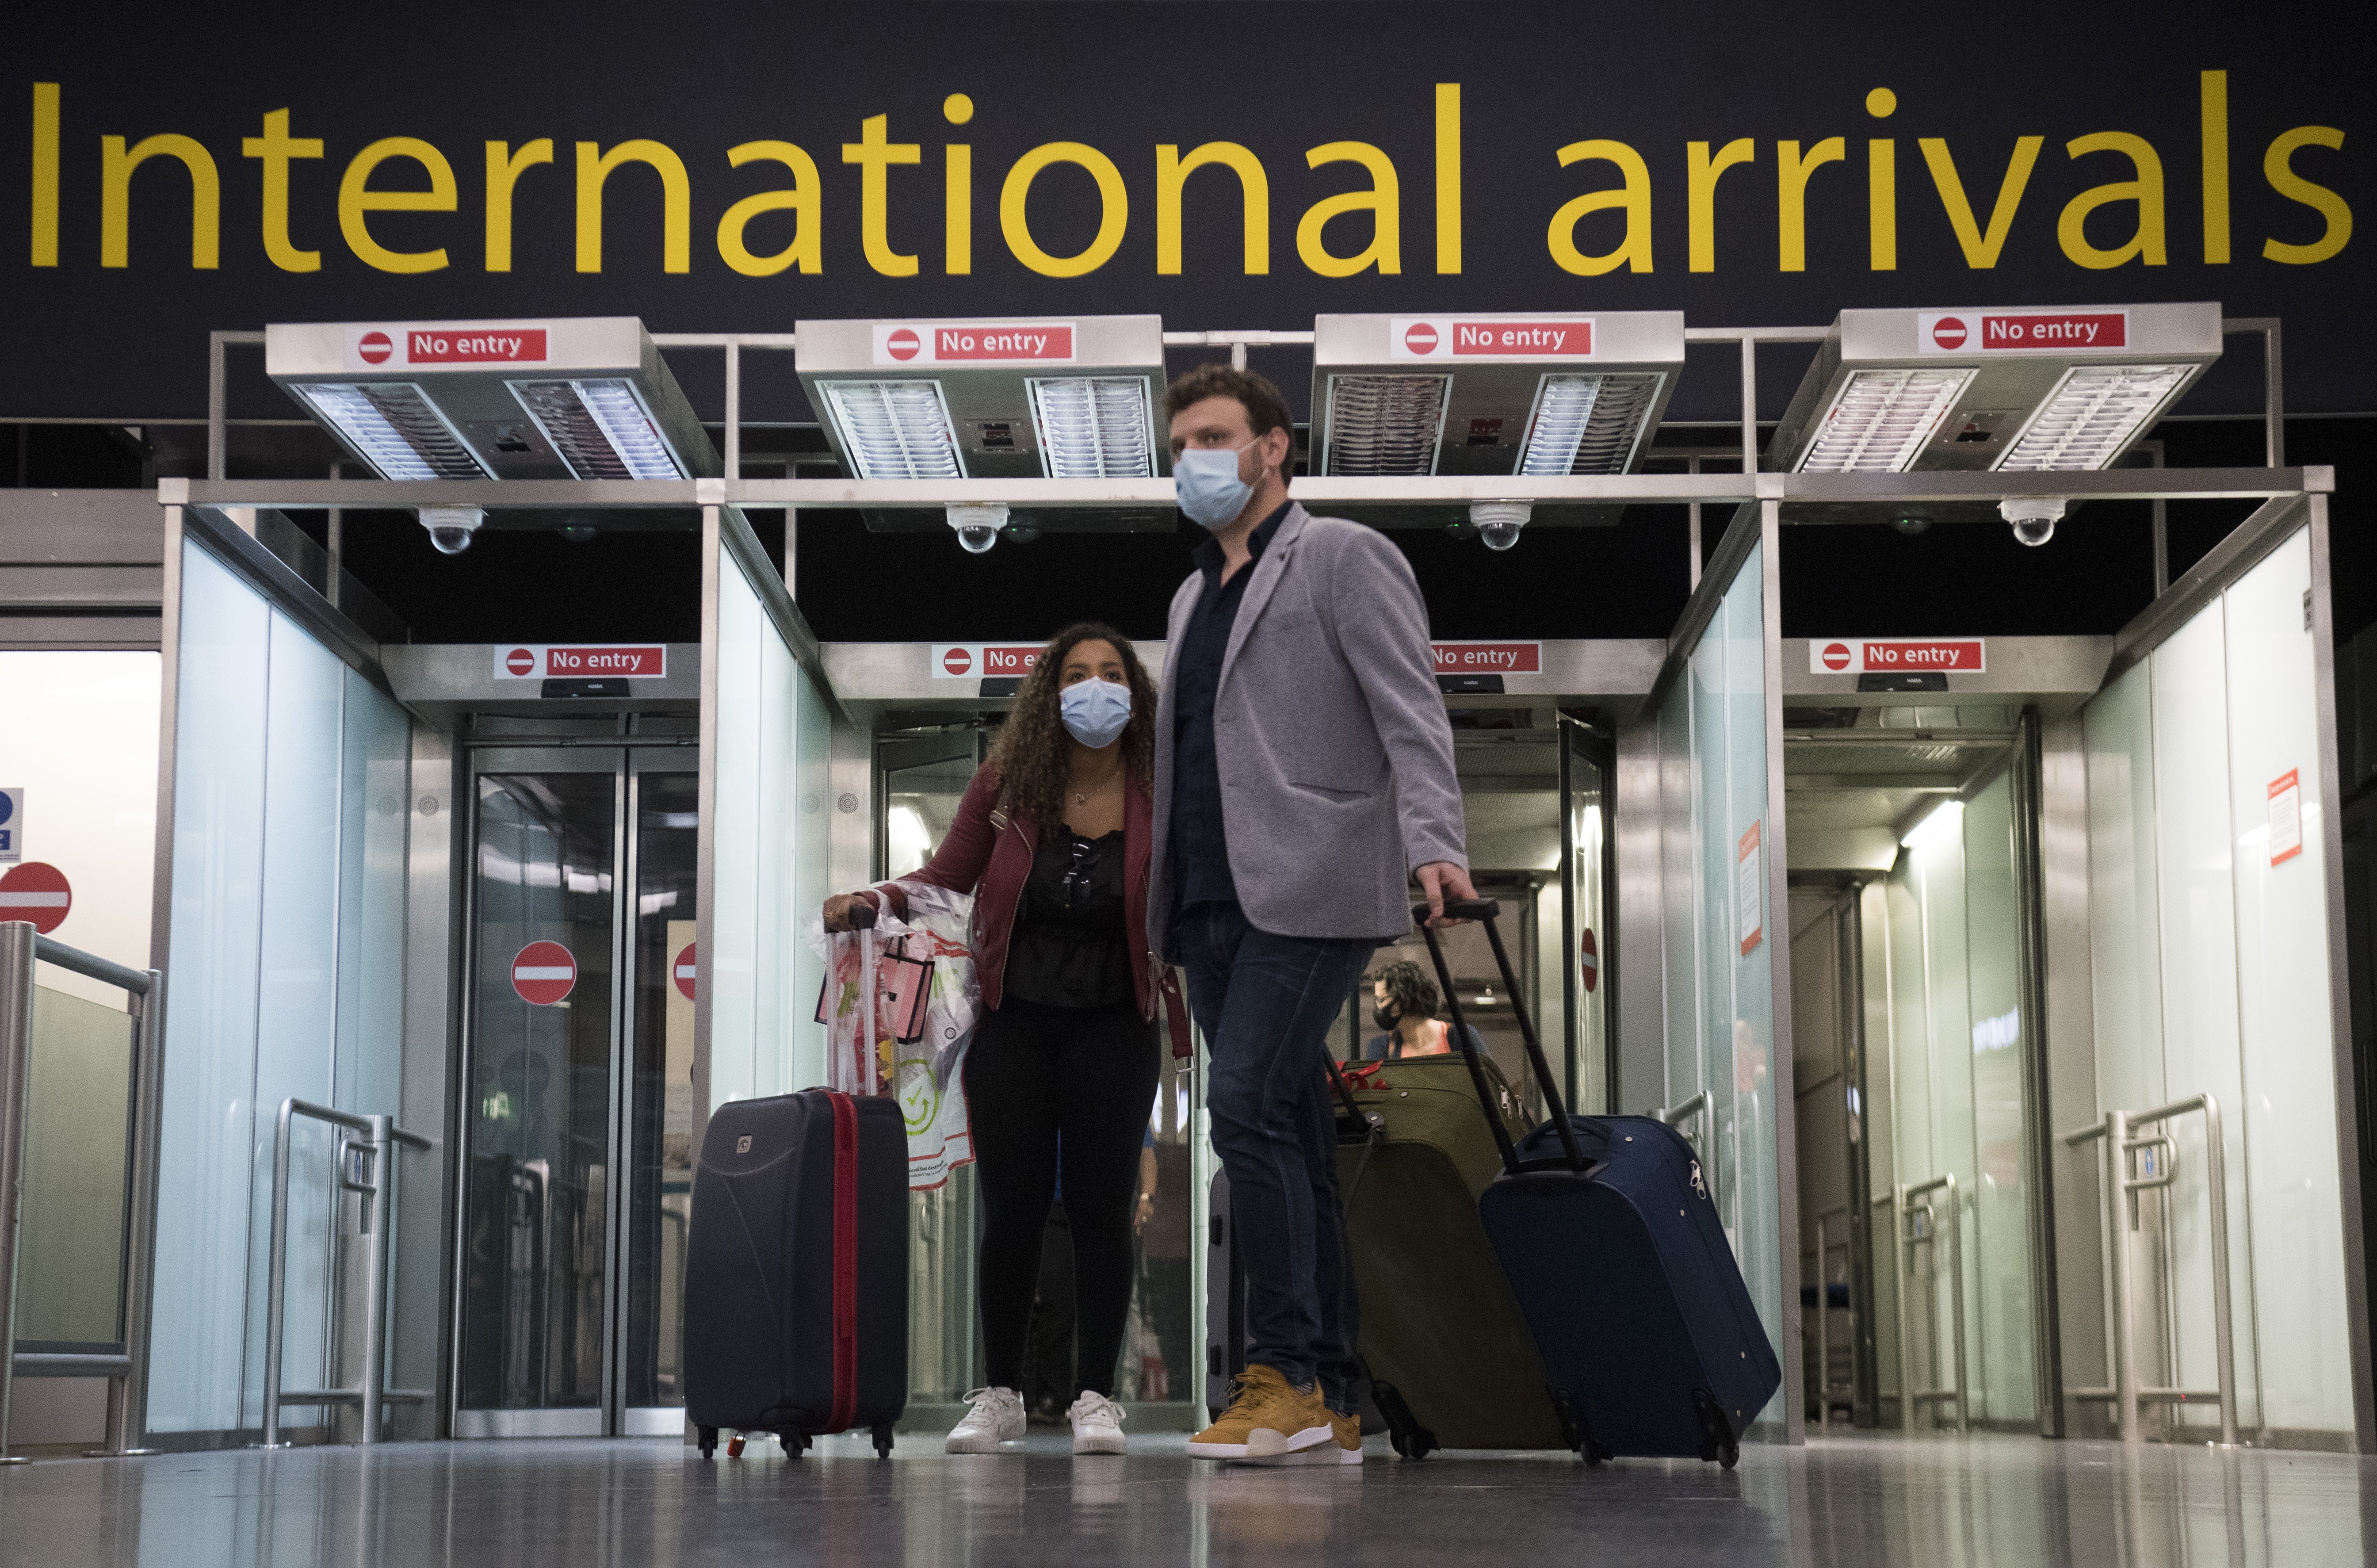 Travel has been severely restricted over the last year. (Kirsty O’Connor/PA)